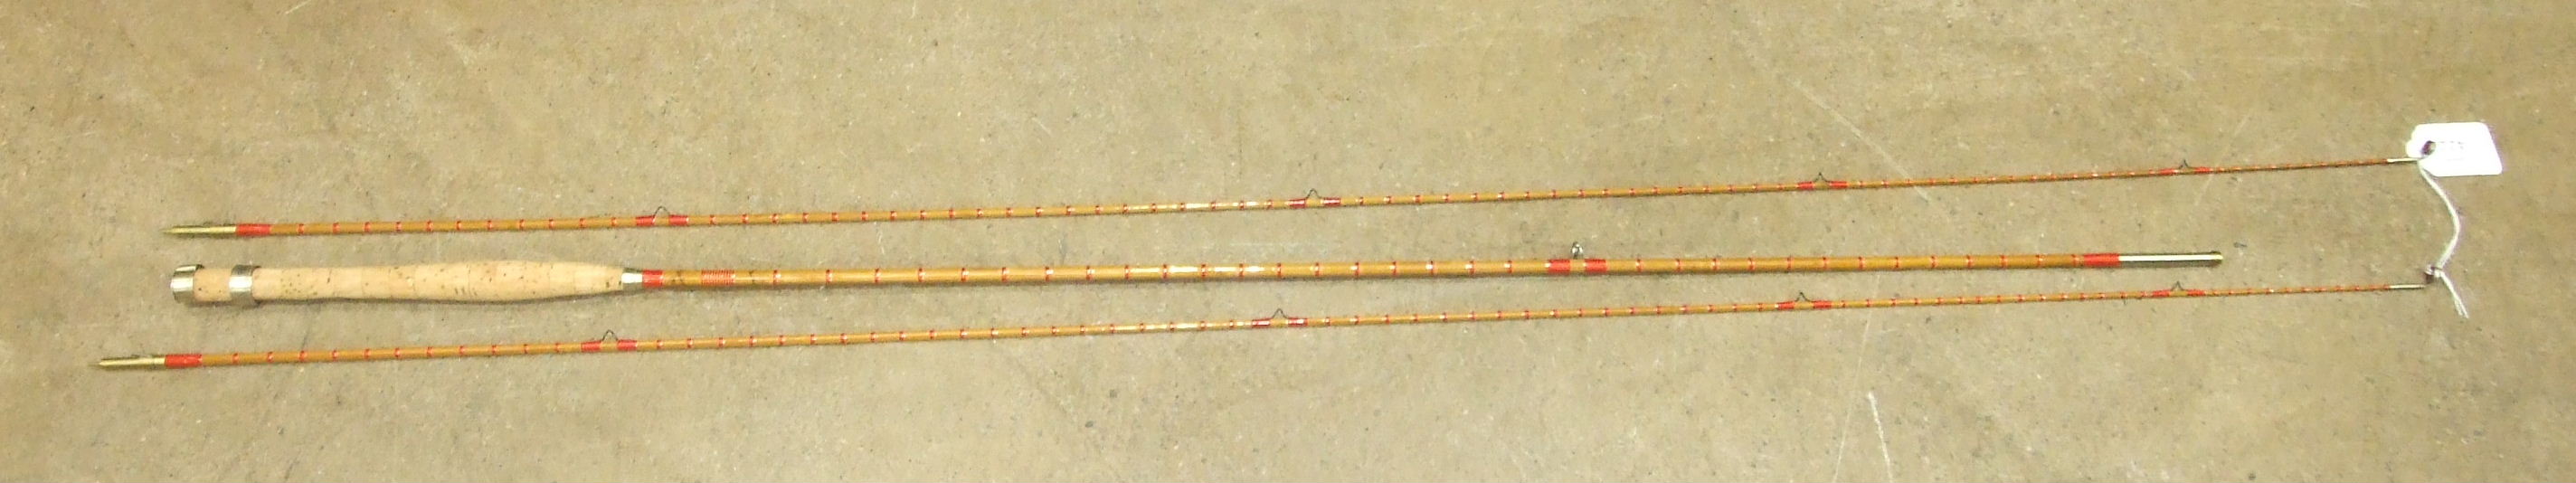 A Hardy's split-cane two-piece fly rod "The Featherweight Regal" no.246936, 7' 6", with spare tip, - Image 2 of 2